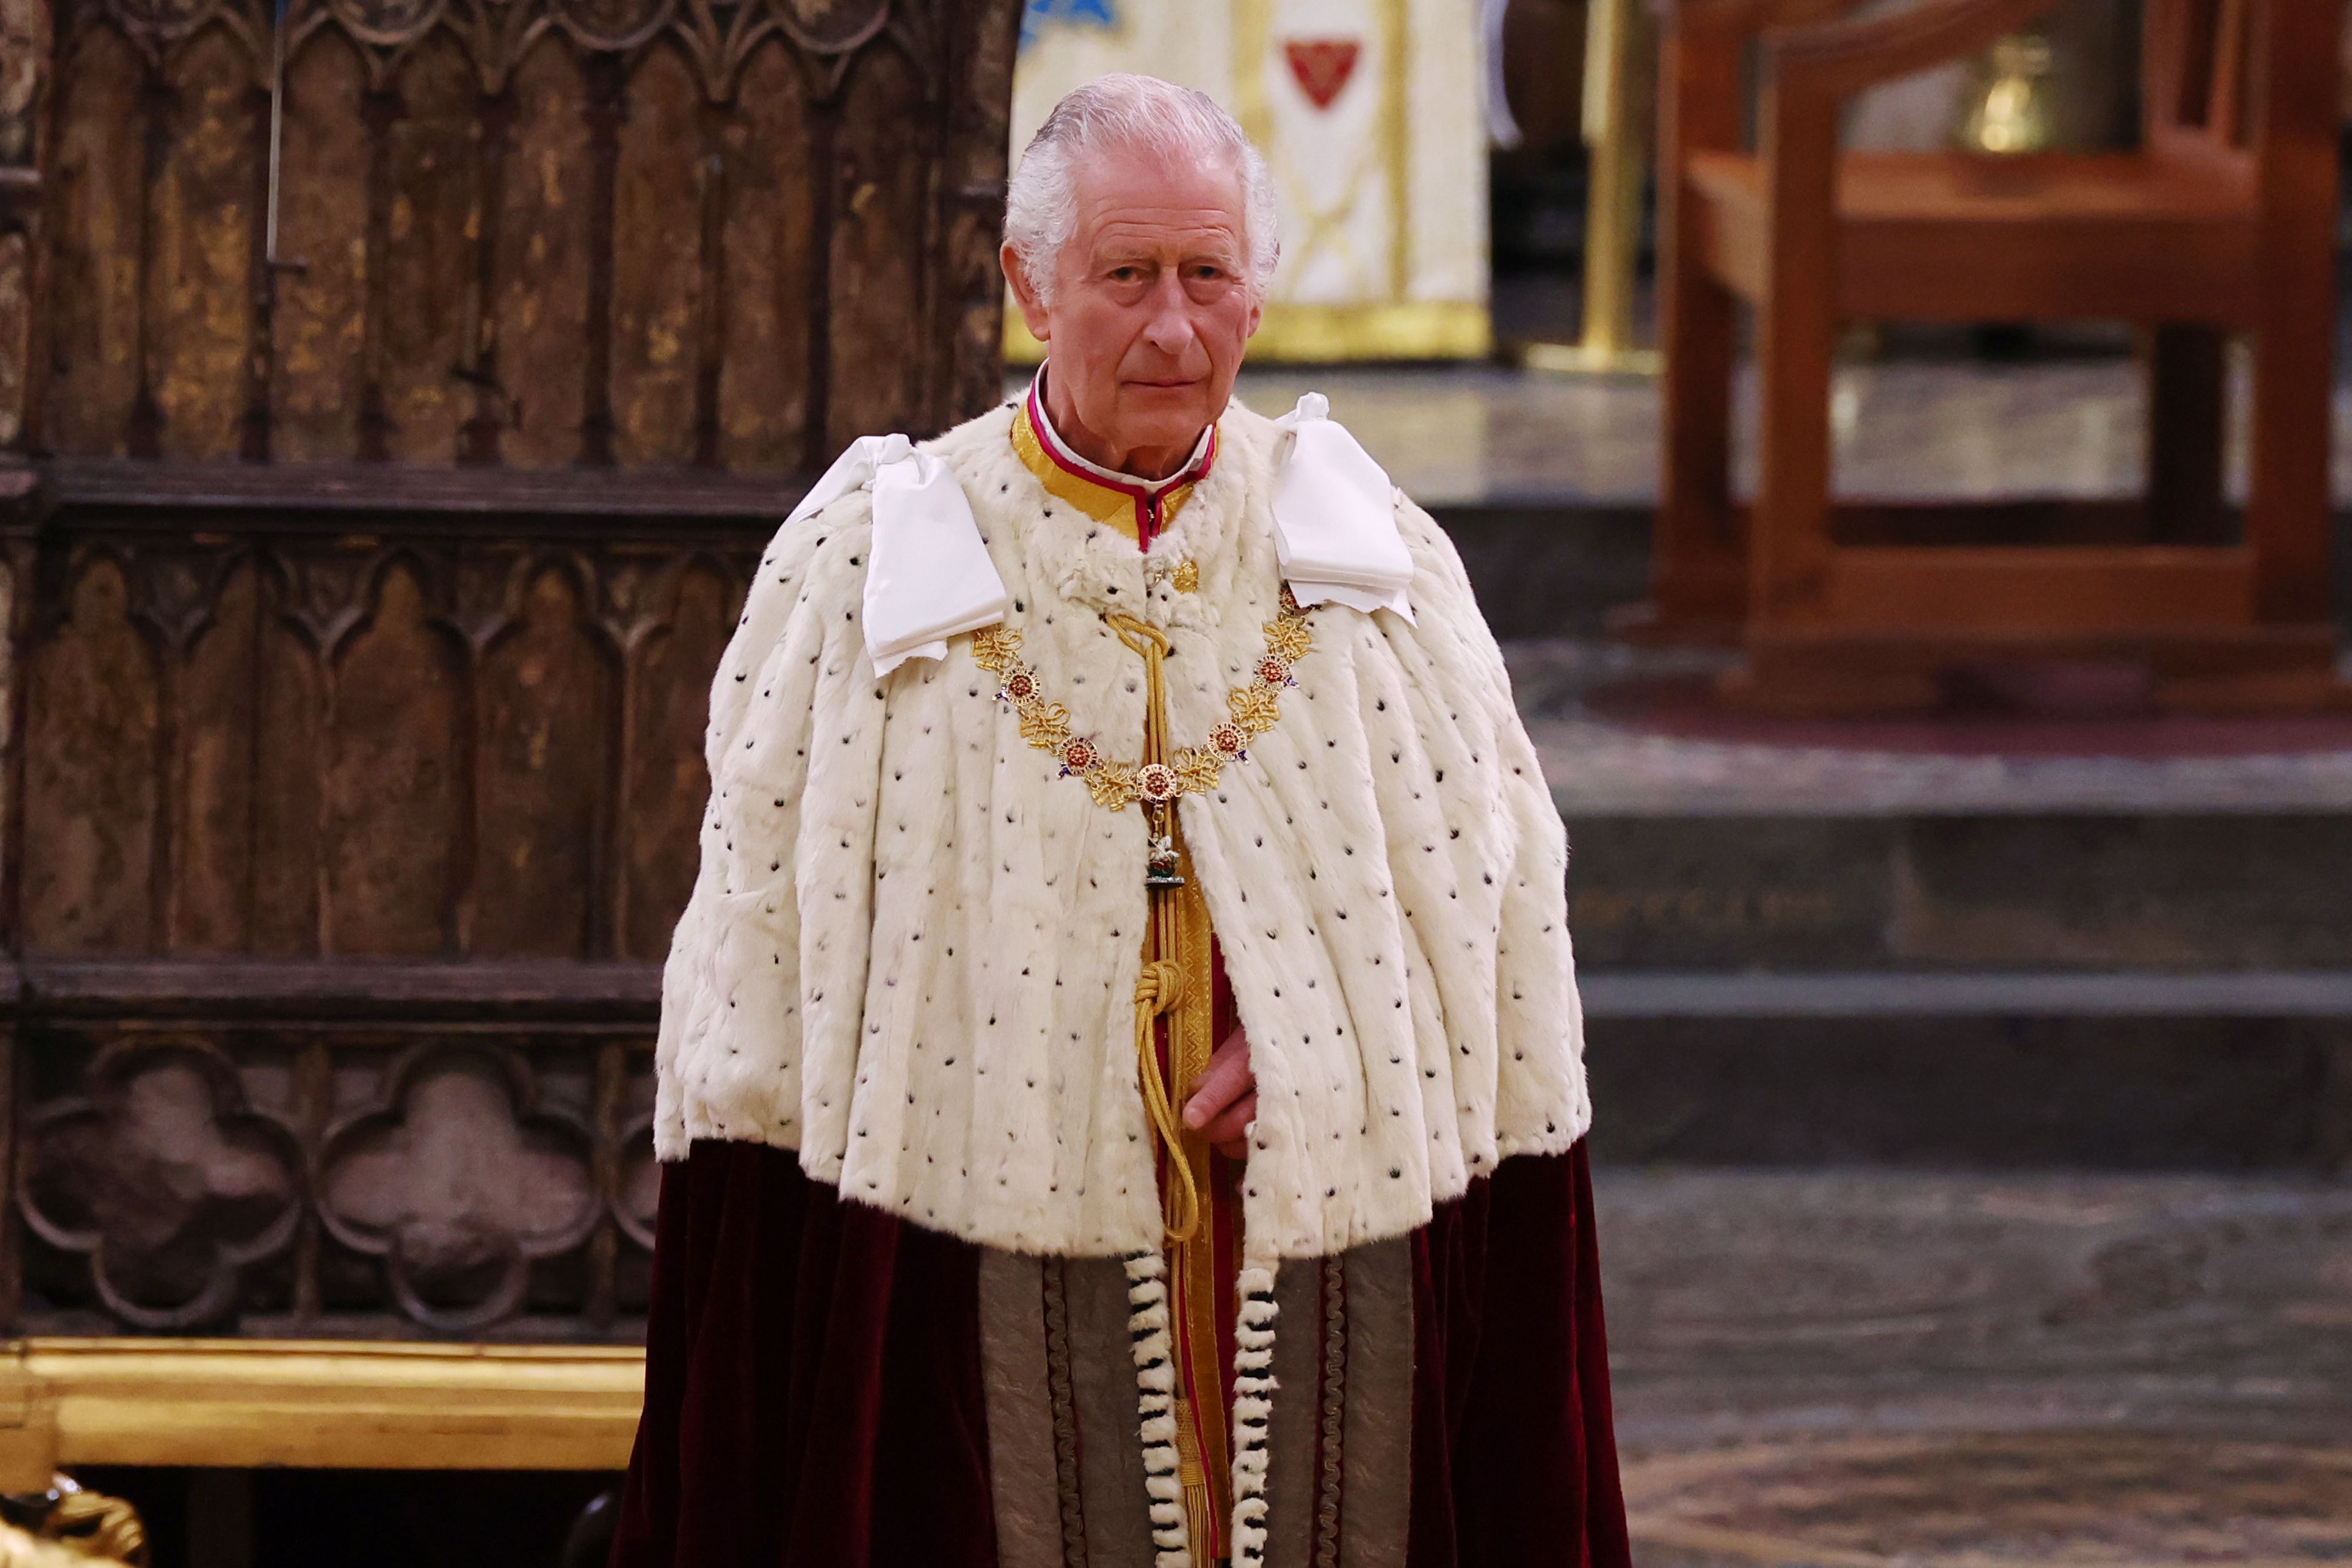 king charles iii attends his coronation at westminster news photo